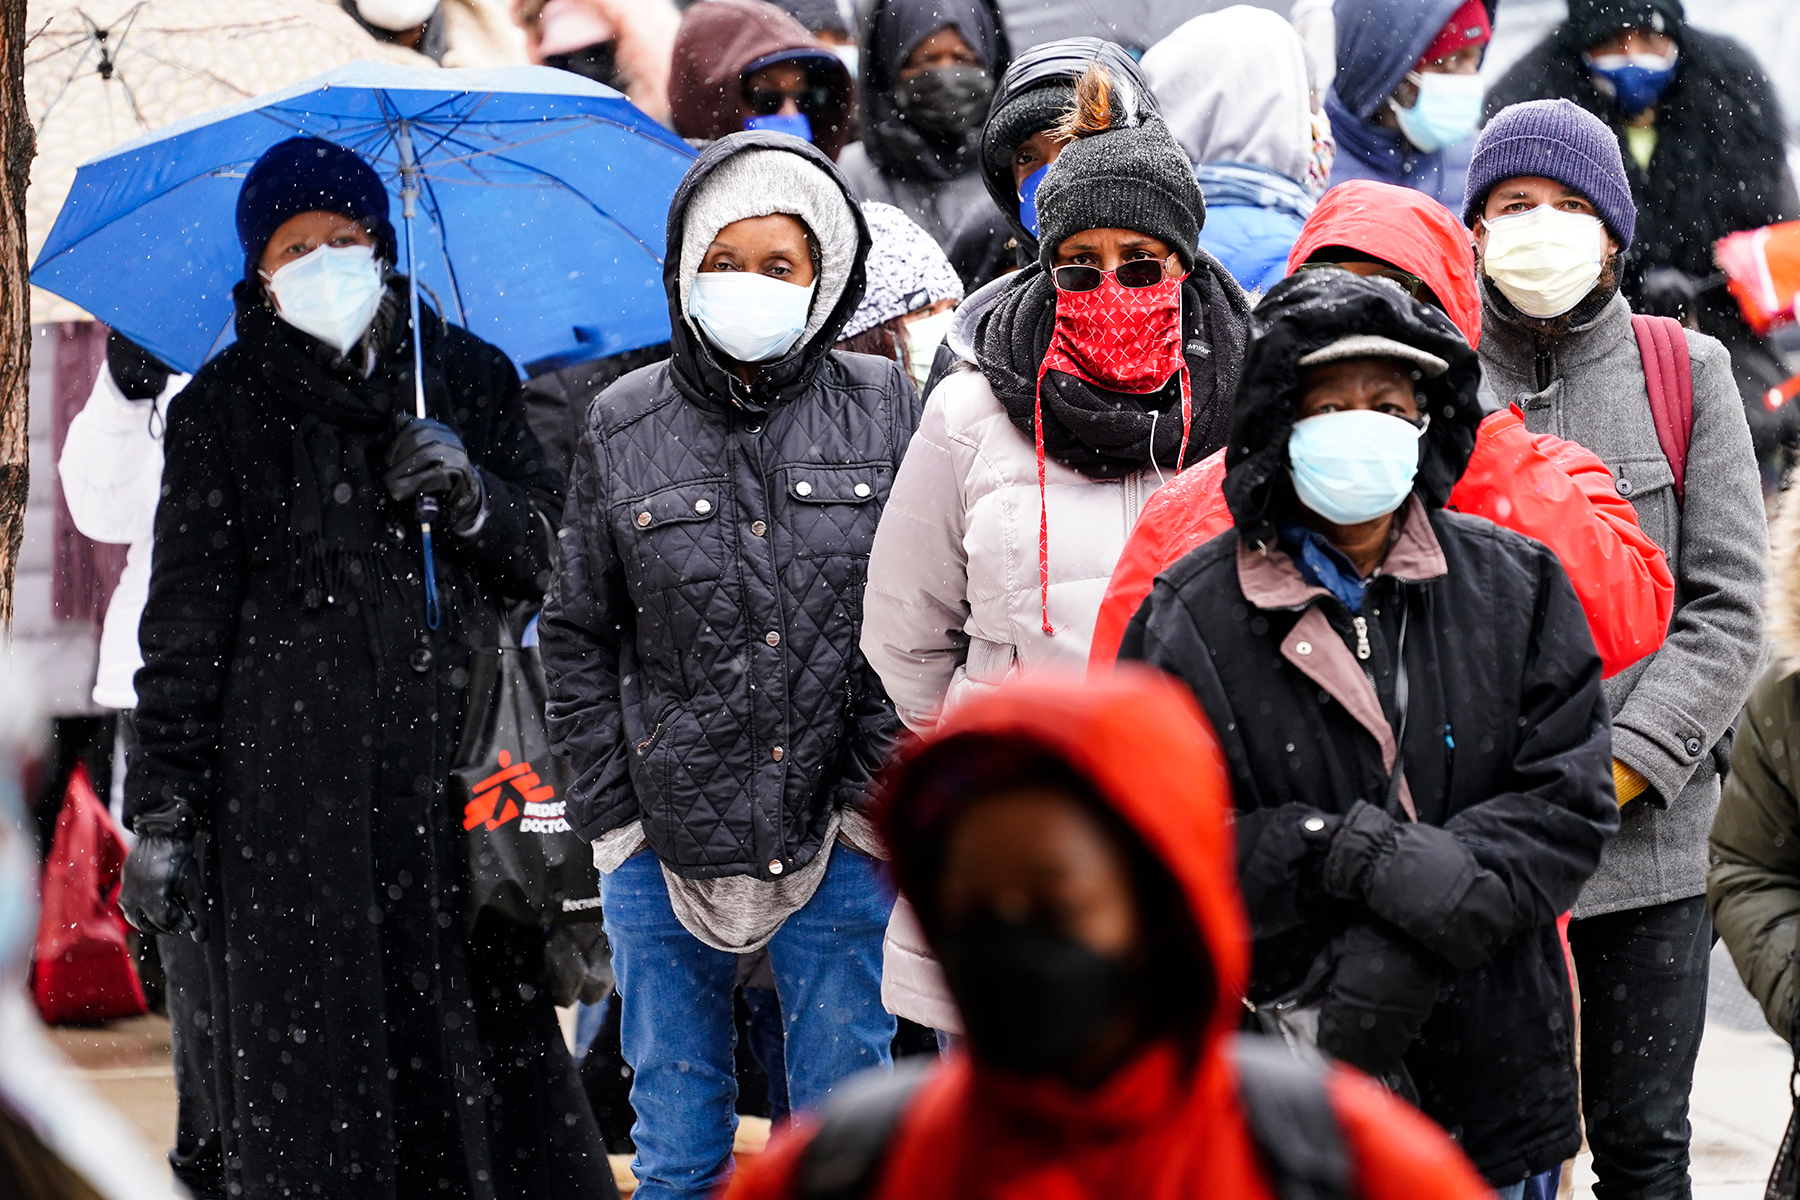 People wait in line at a 24-hour, walk-up COVID-19 vaccination clinic hosted by the Black Doctors COVID-19 Consortium at Temple University's Liacouras Center in Philadelphia, Friday, Feb. 19, 2021. (AP Photo/Matt Rourke)